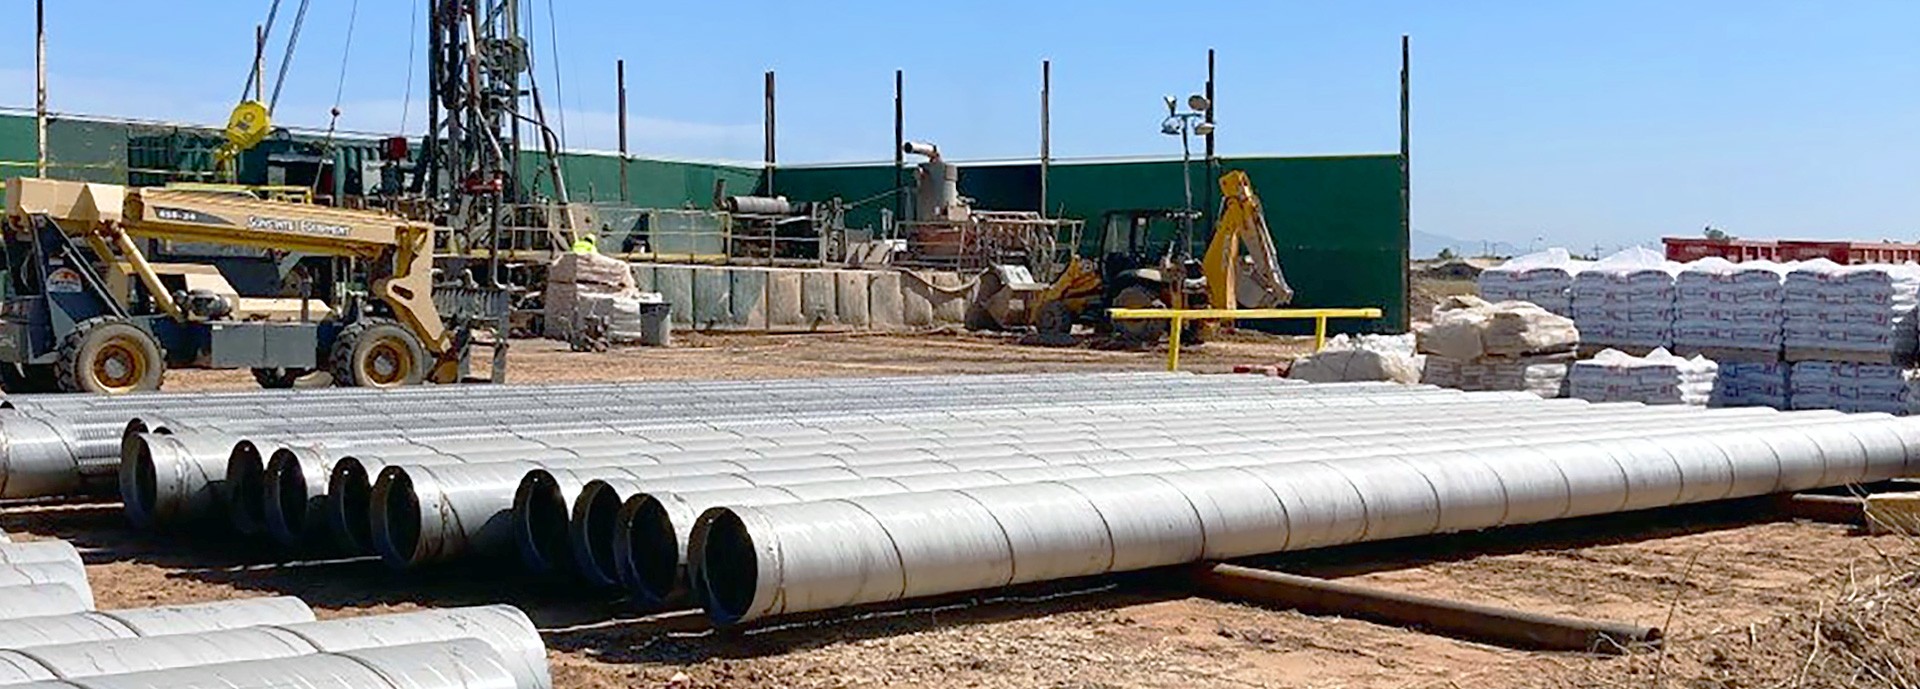 drill pipes laying on desert ground with construction area in the background and blue sky